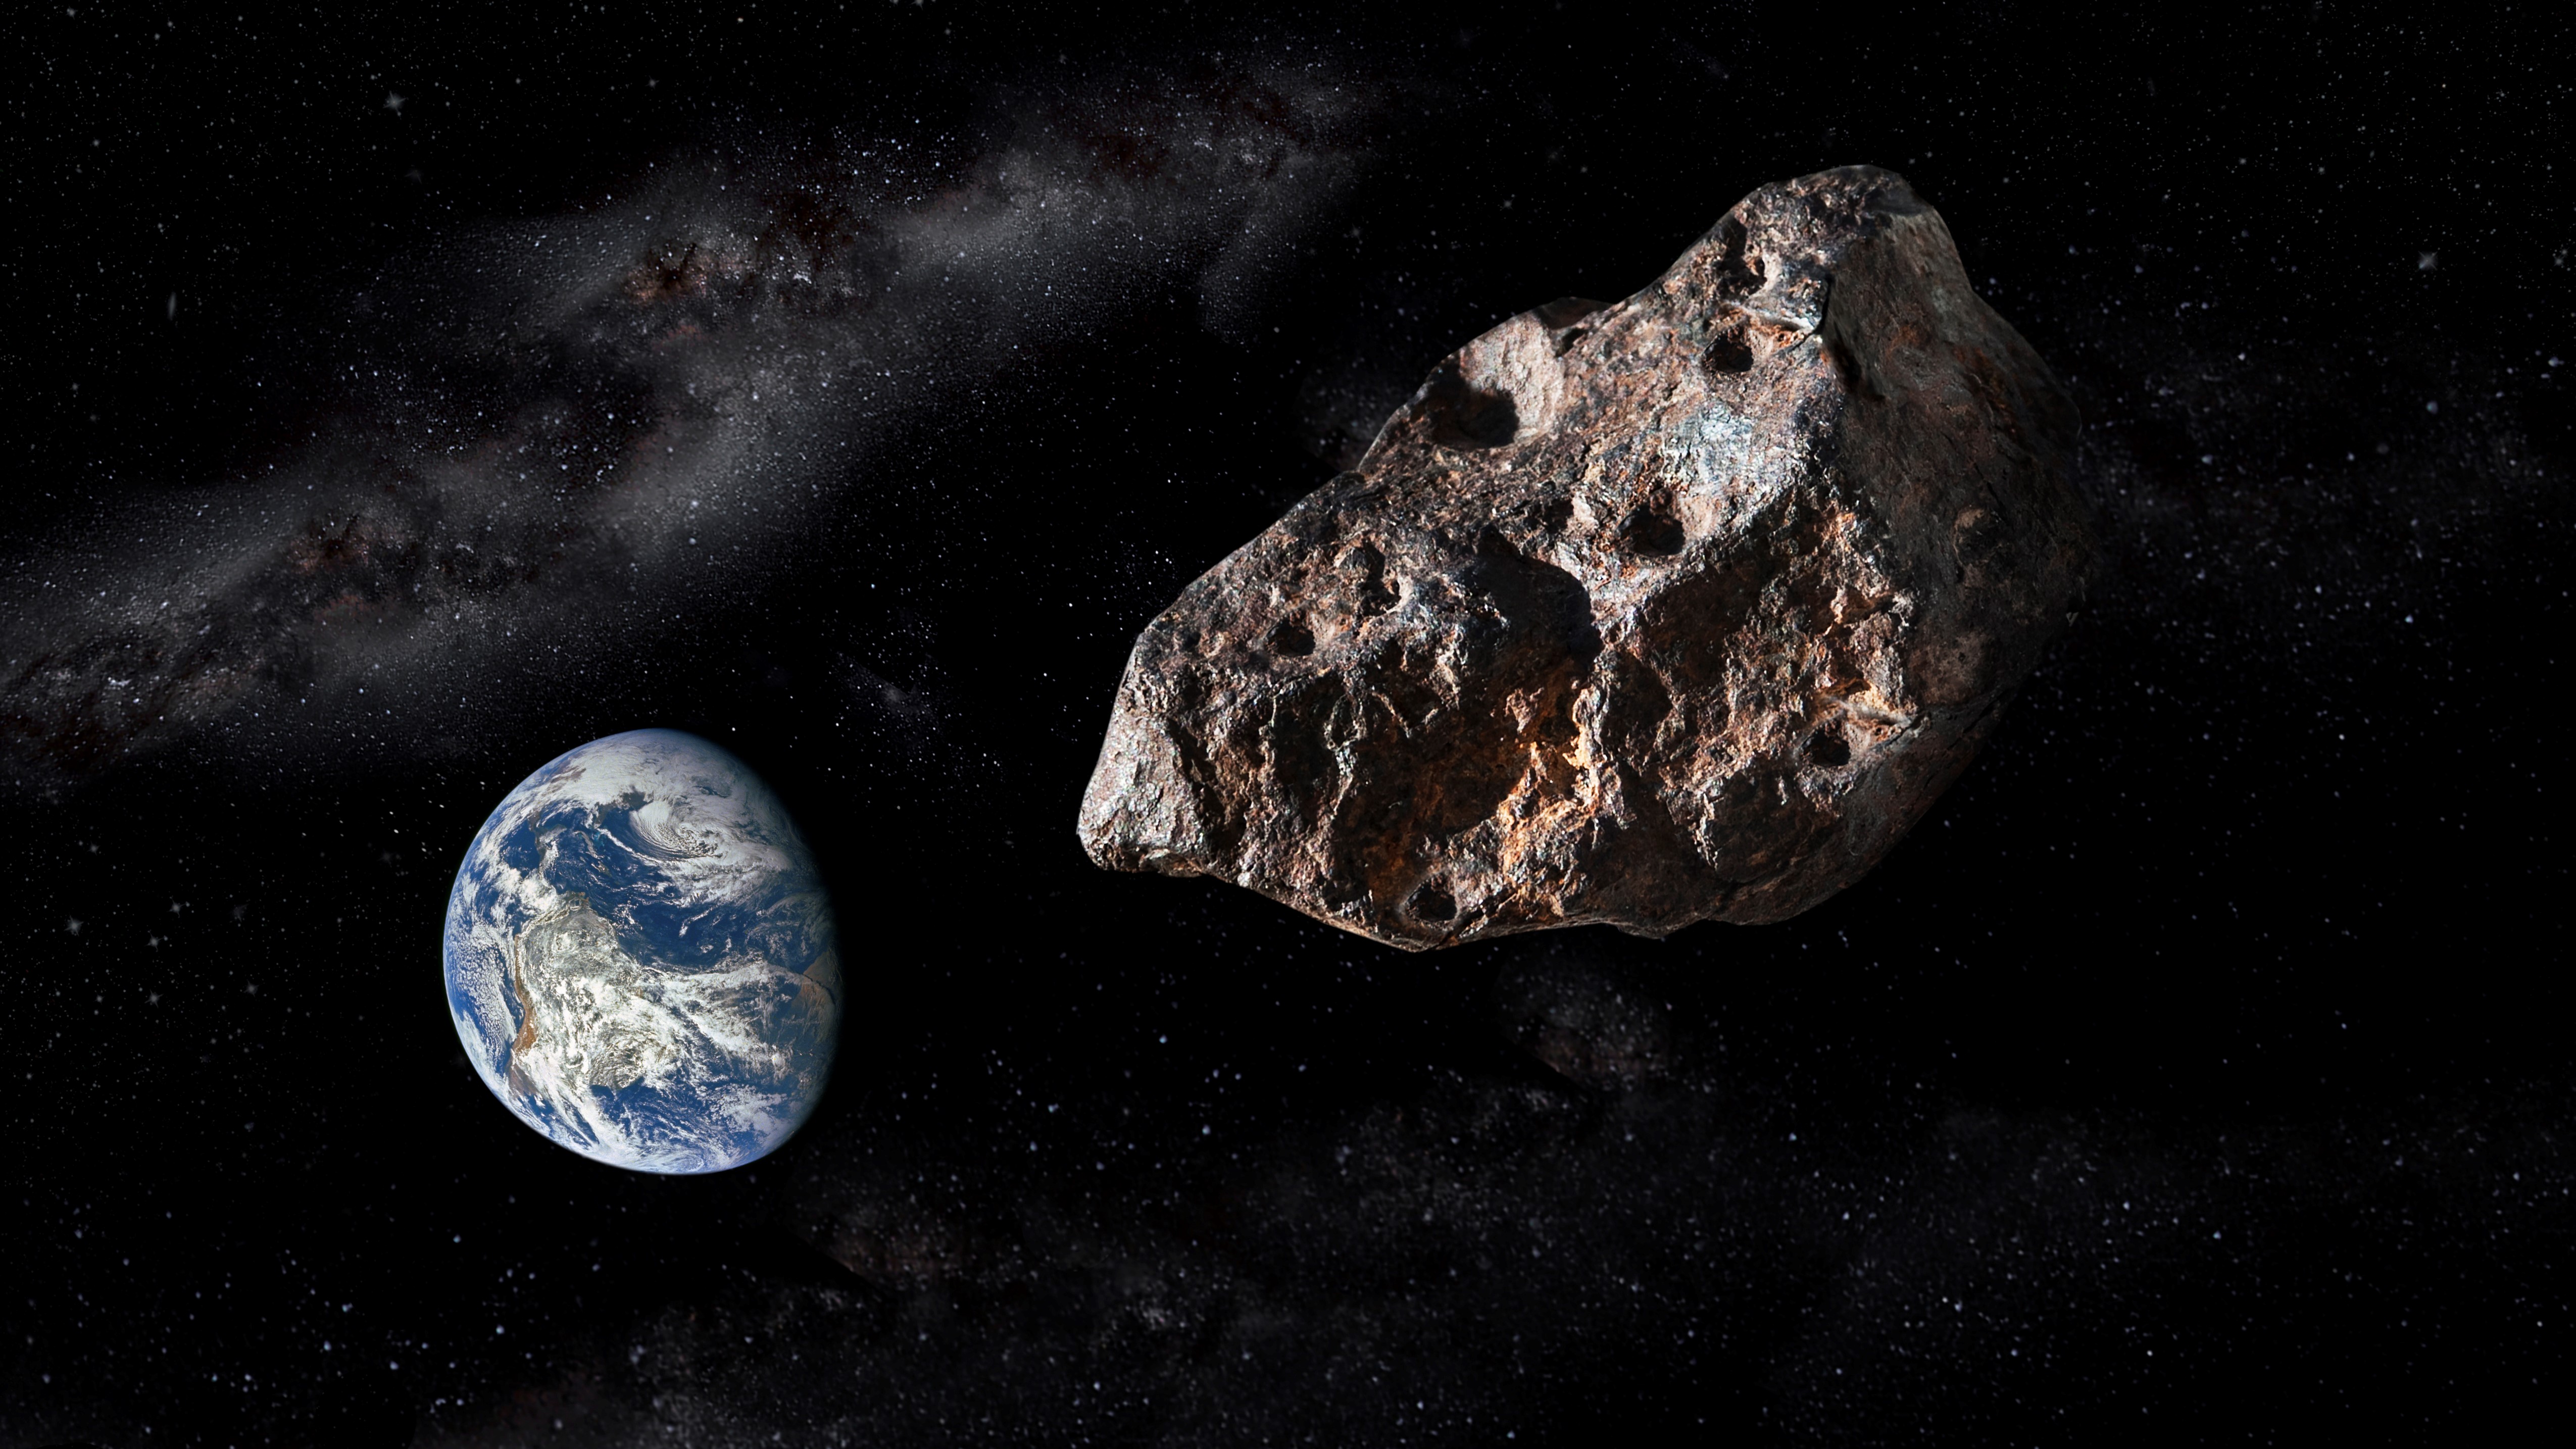 An artist's illustration of a distant asteroid near Earth.